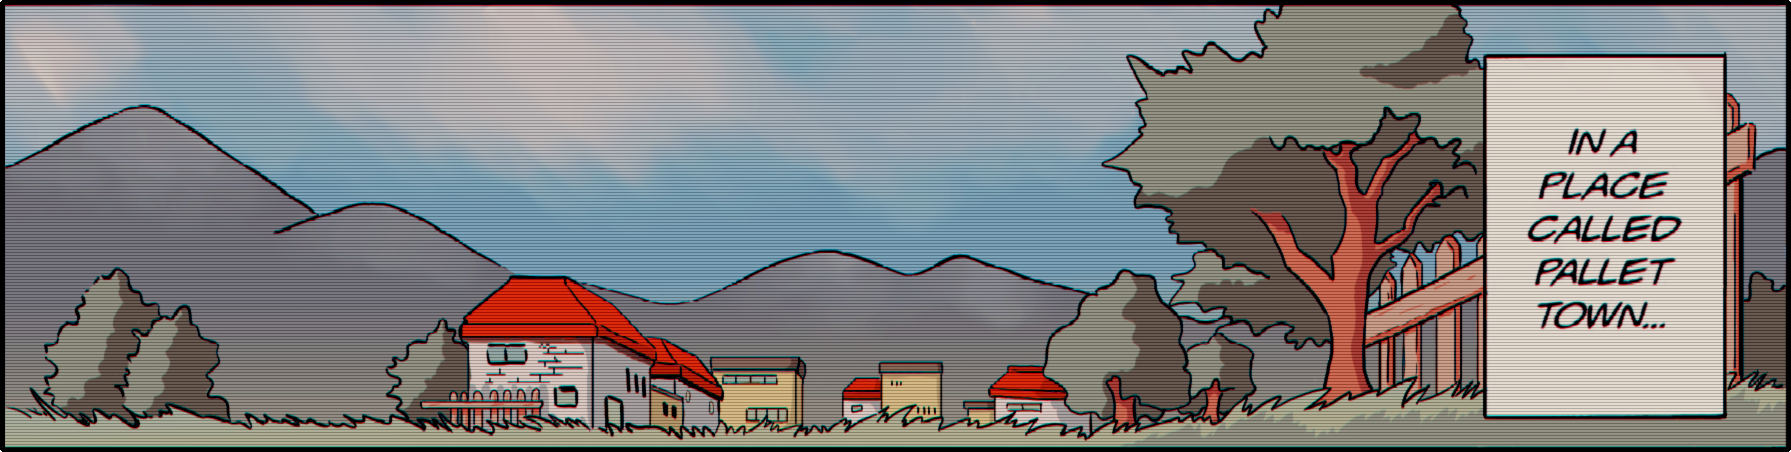 The first panel of Pokemon Adventures: A wide shot of a rural town with trees and bushes in the foreground and a mountain range in the background, with a caption saying 'In a place called Pallet Town...'